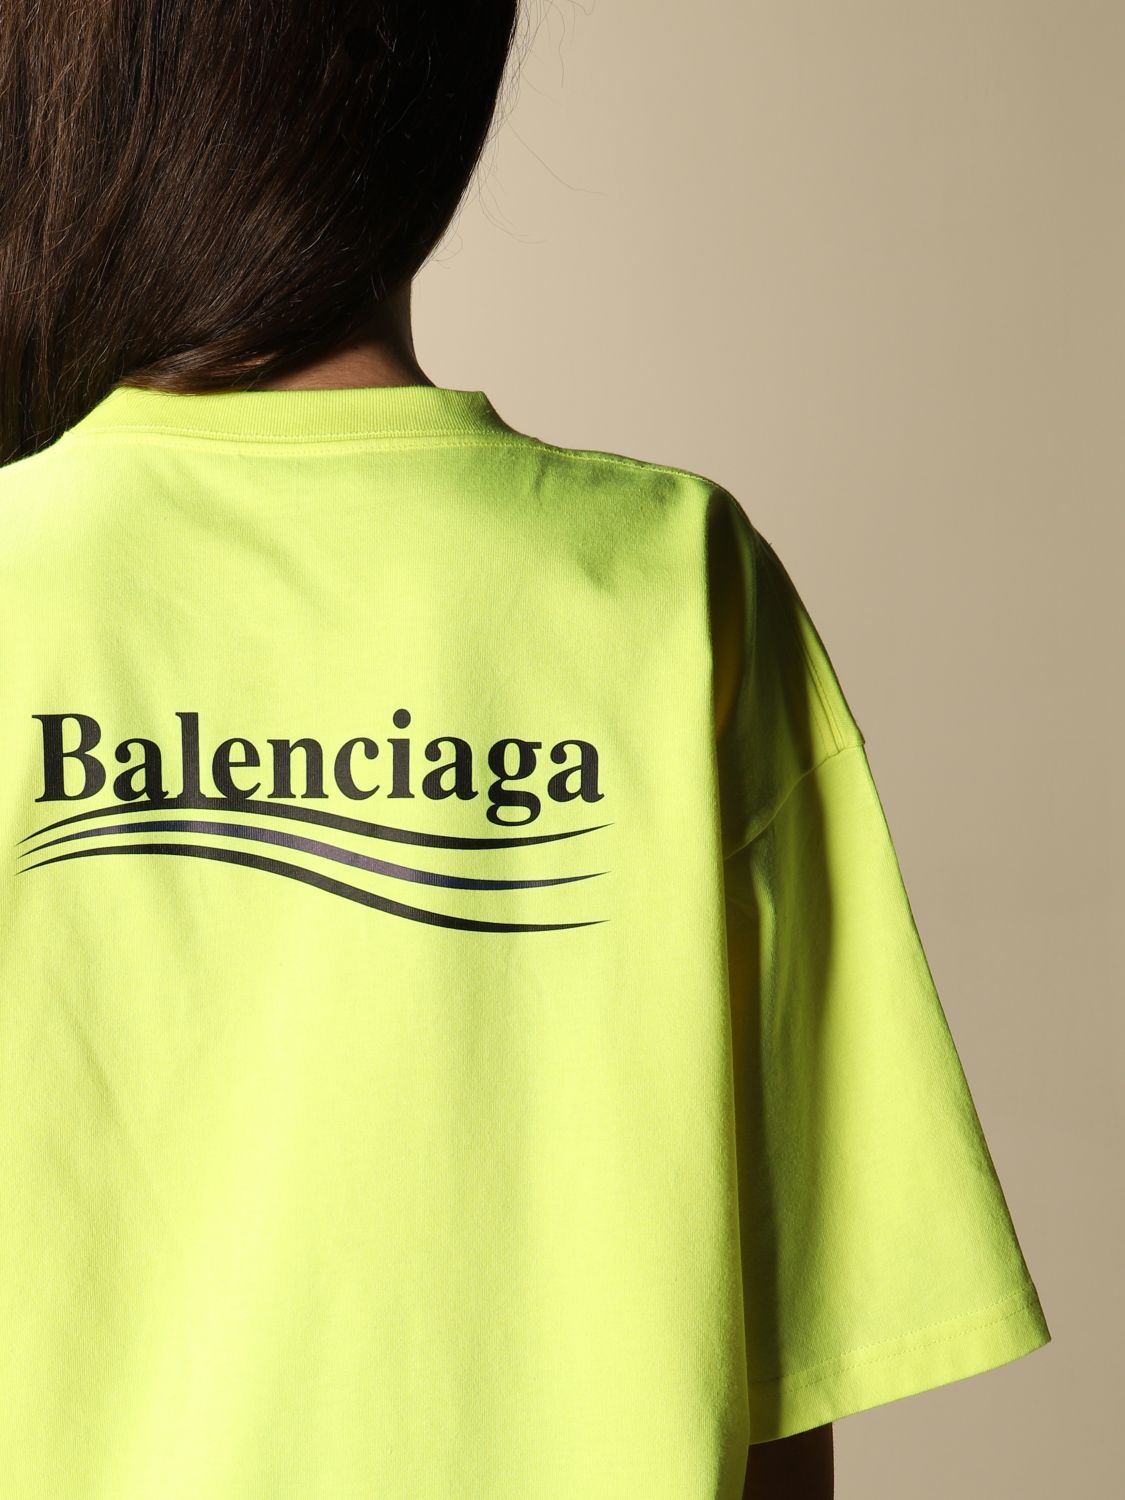 Balenciaga Femme Fatale Embroidery Oversize T Shirt Size L Sold Out  eBay